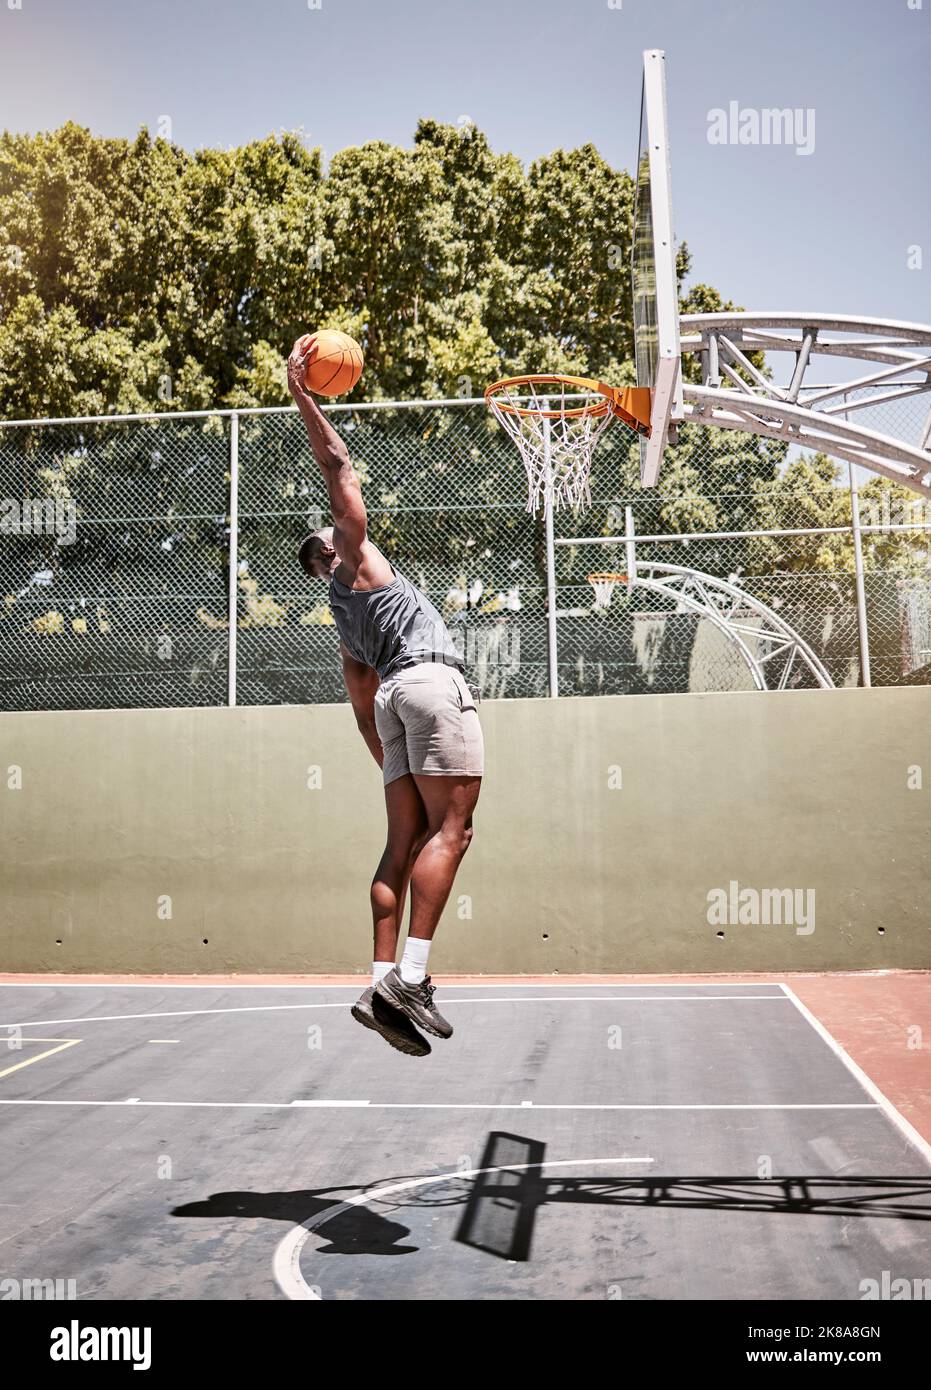 Basketball dunk, sport and strong black man athlete on a outdoor basketball court with fitness. Sports person basketball player with cardio workout Stock Photo